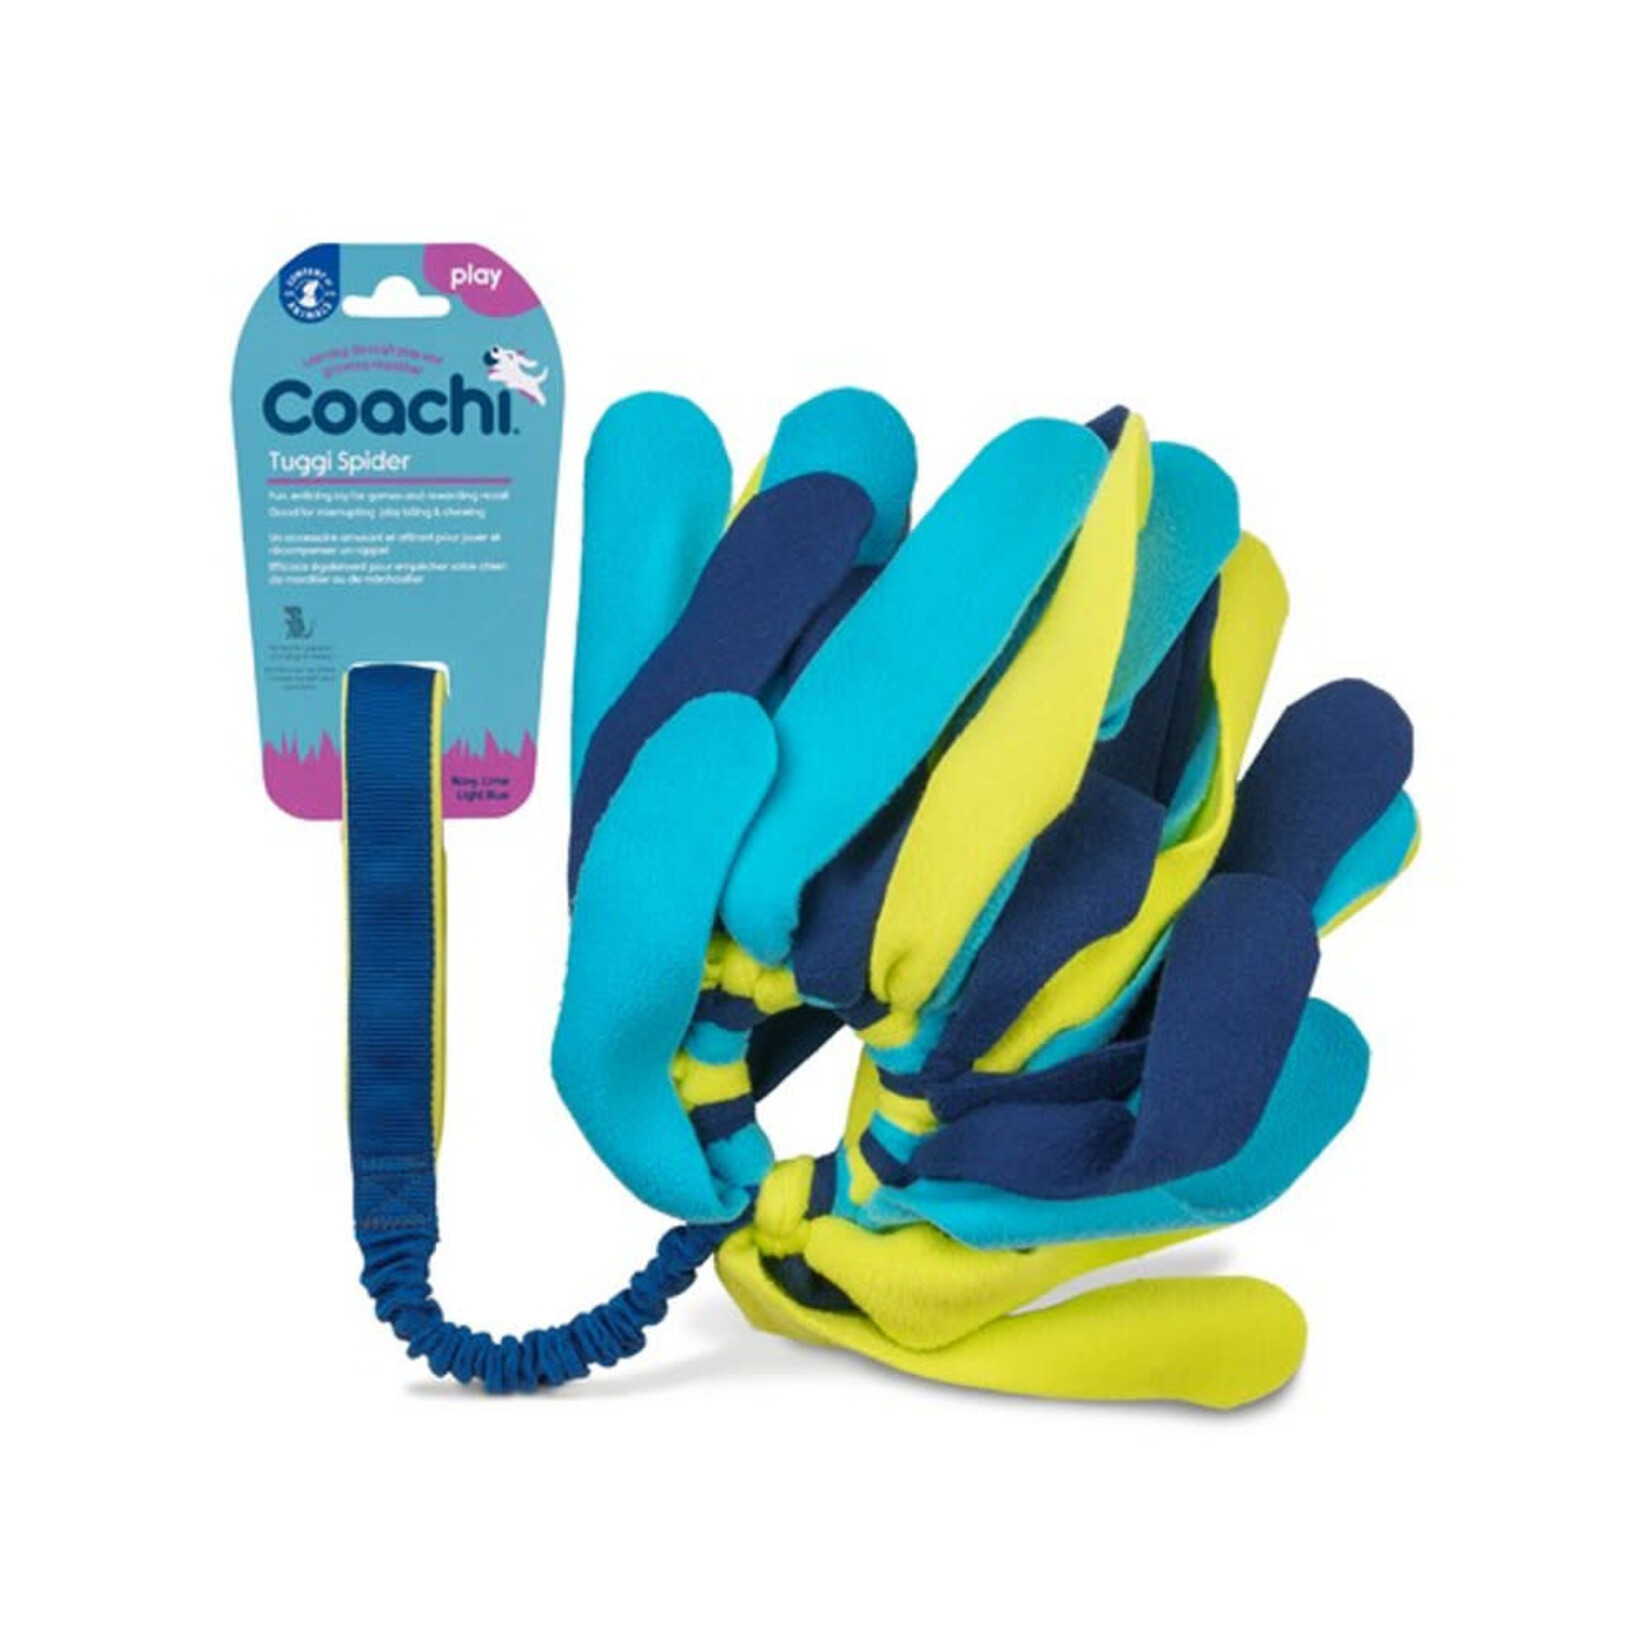 Company of Animals Coachi Tuggi Spider Dog Toy in Navy, Lime & Light Blue